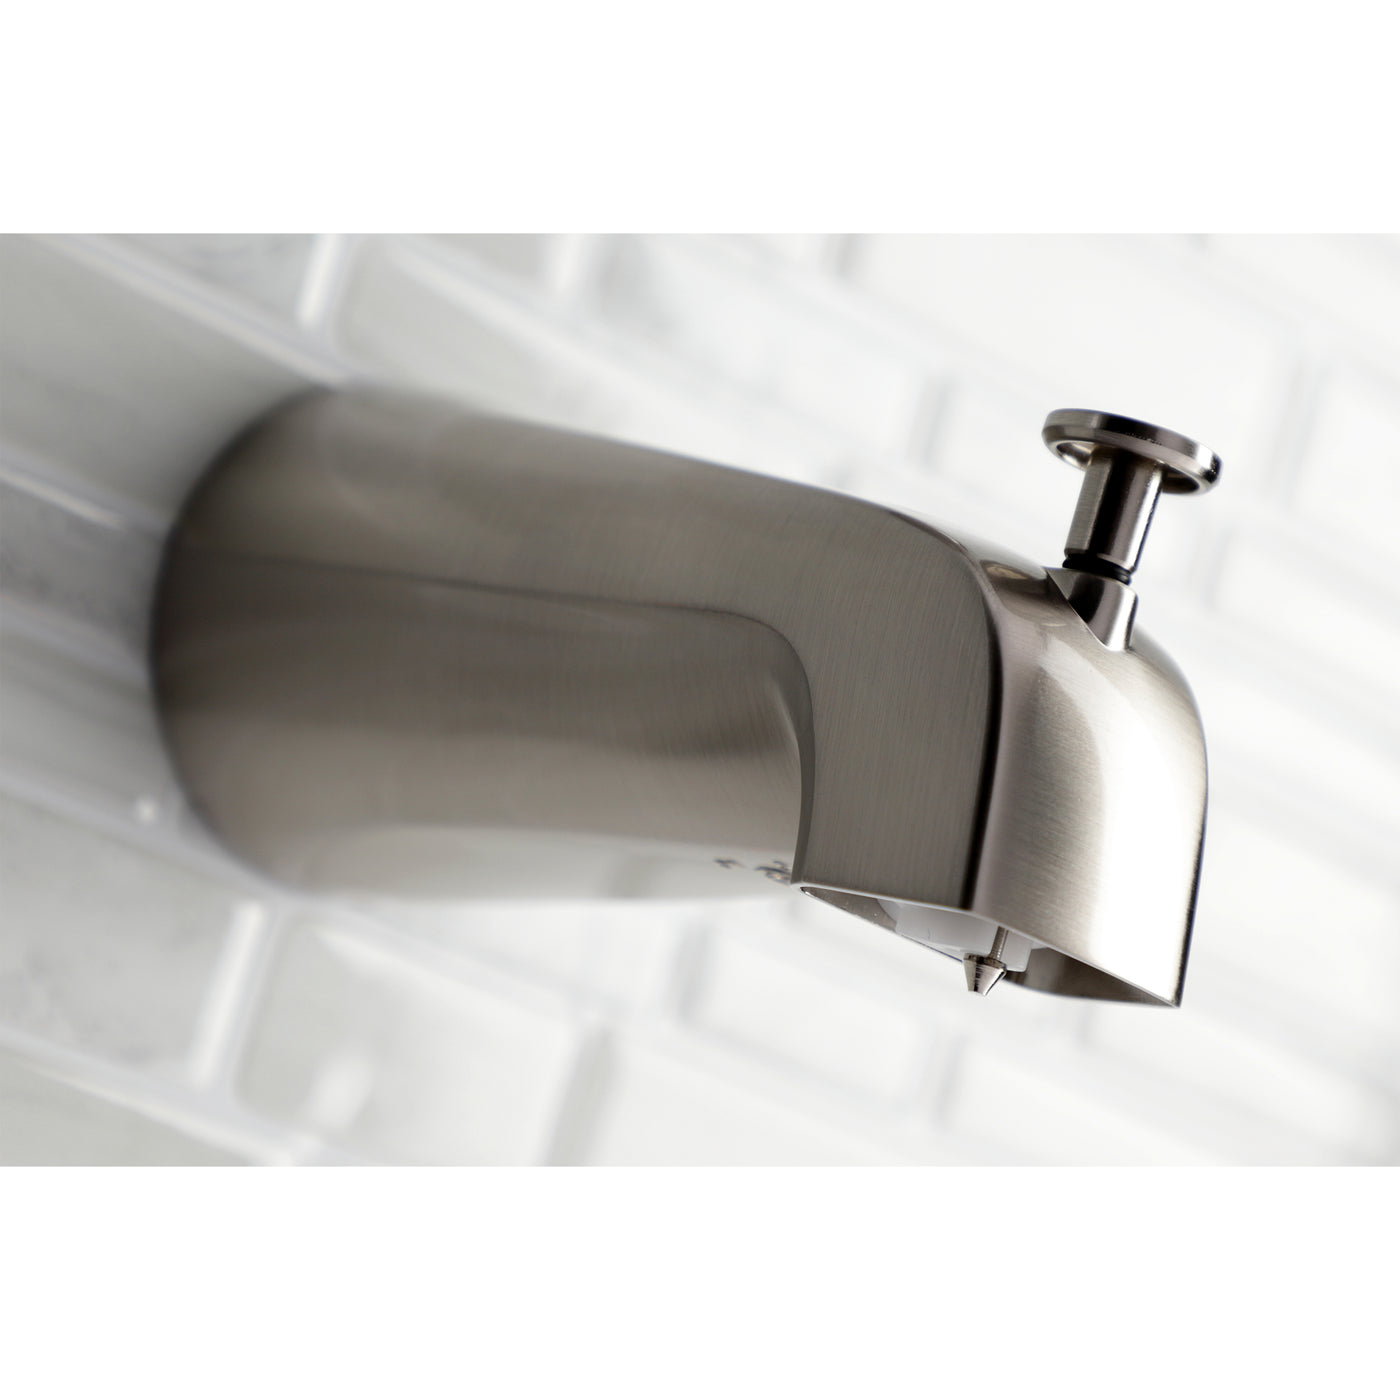 Elements of Design DK188A8 5-1/4 Inch Zinc Tub Spout with Diverter, Brushed Nickel